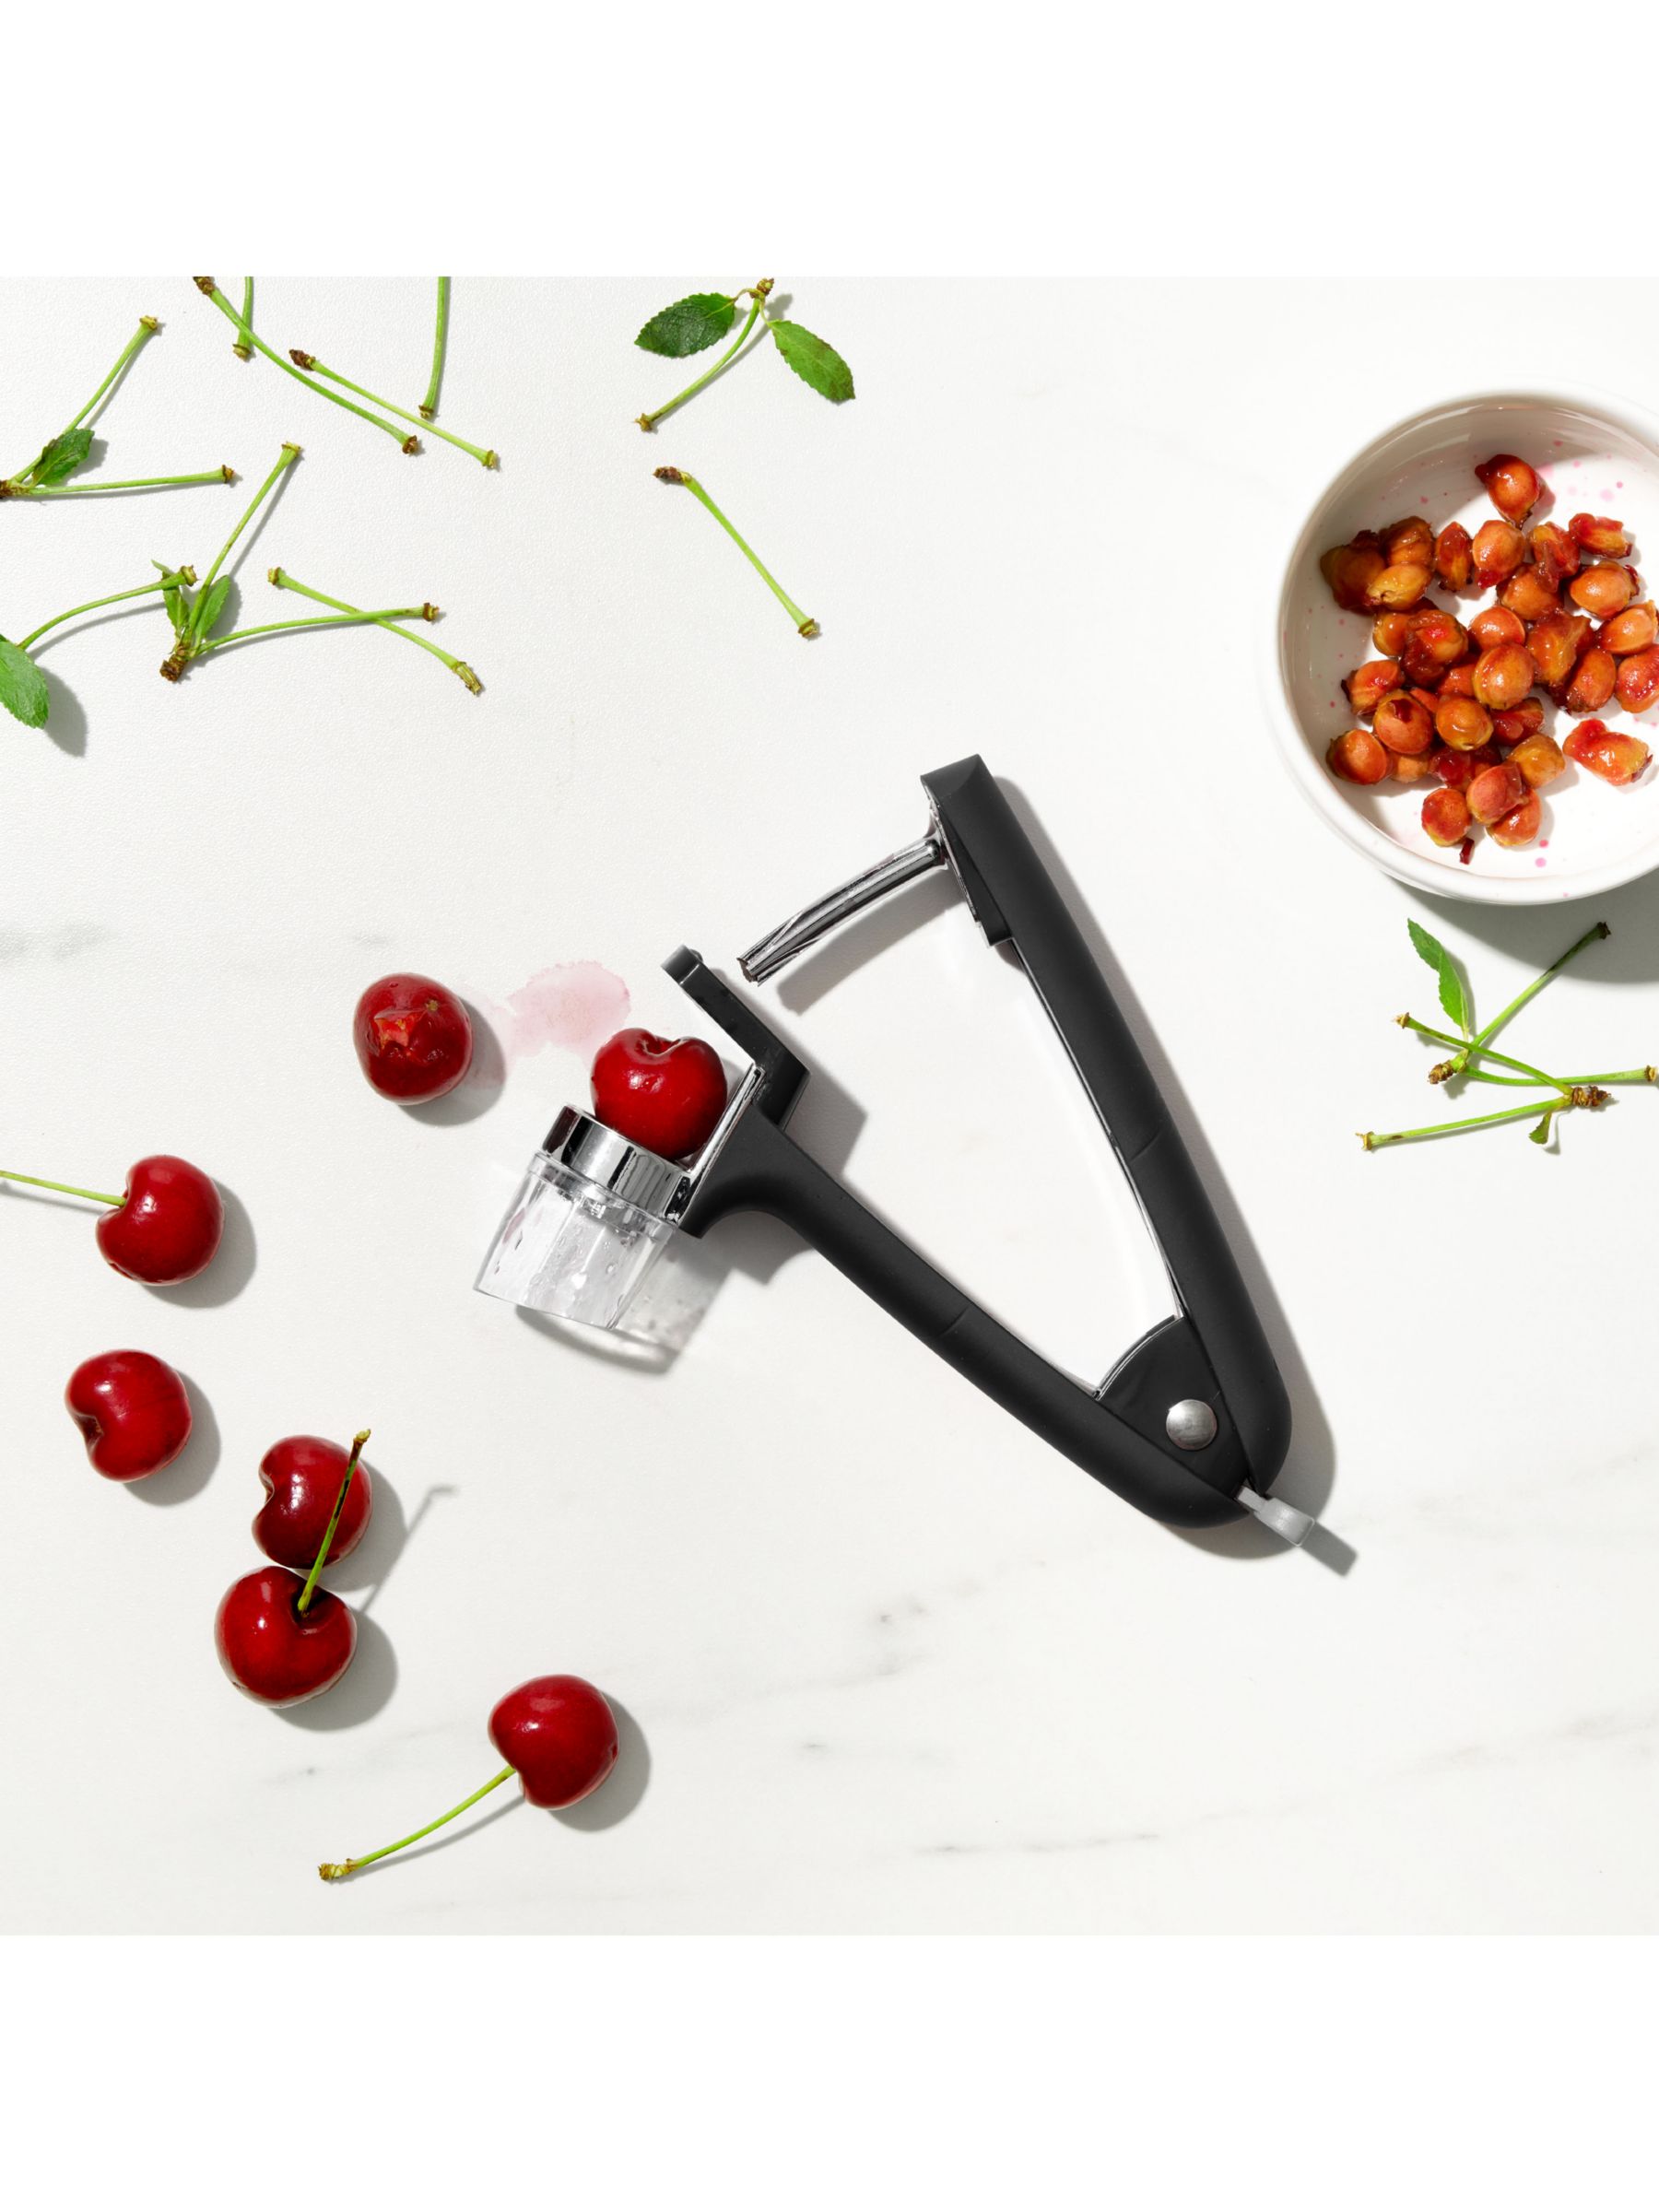 useful for preparing jams Christmas and birthday gift idea Cherry stoner stone lever manual olives seen on TV 